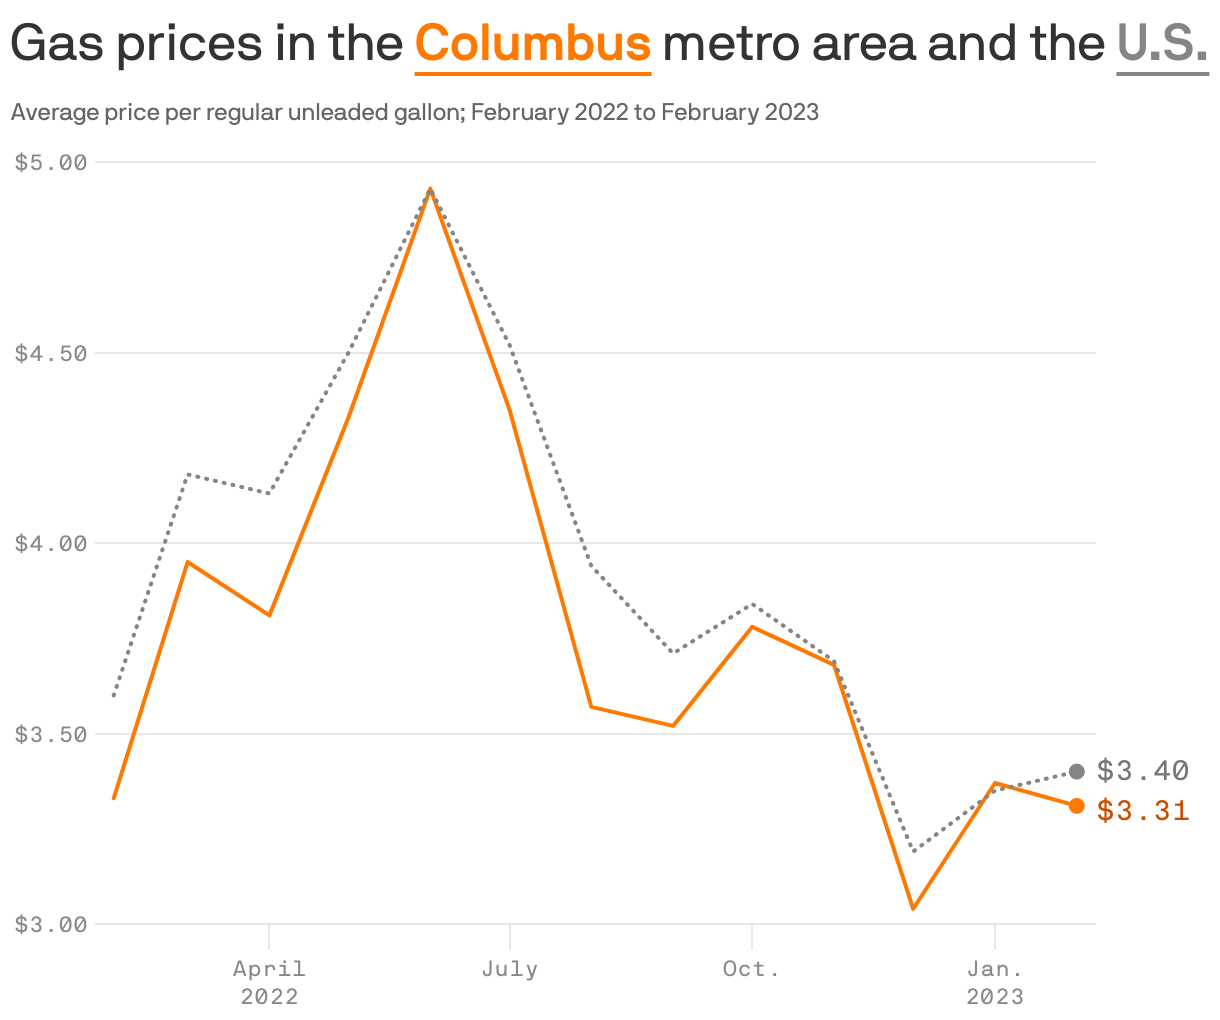 Gas prices in the <b style='text-decoration: underline; text-underline-position: under; color: #ff7900;'>Columbus</b> metro area and the <b style='text-decoration: underline; text-underline-position: under; color: #858585;'>U.S.</b>